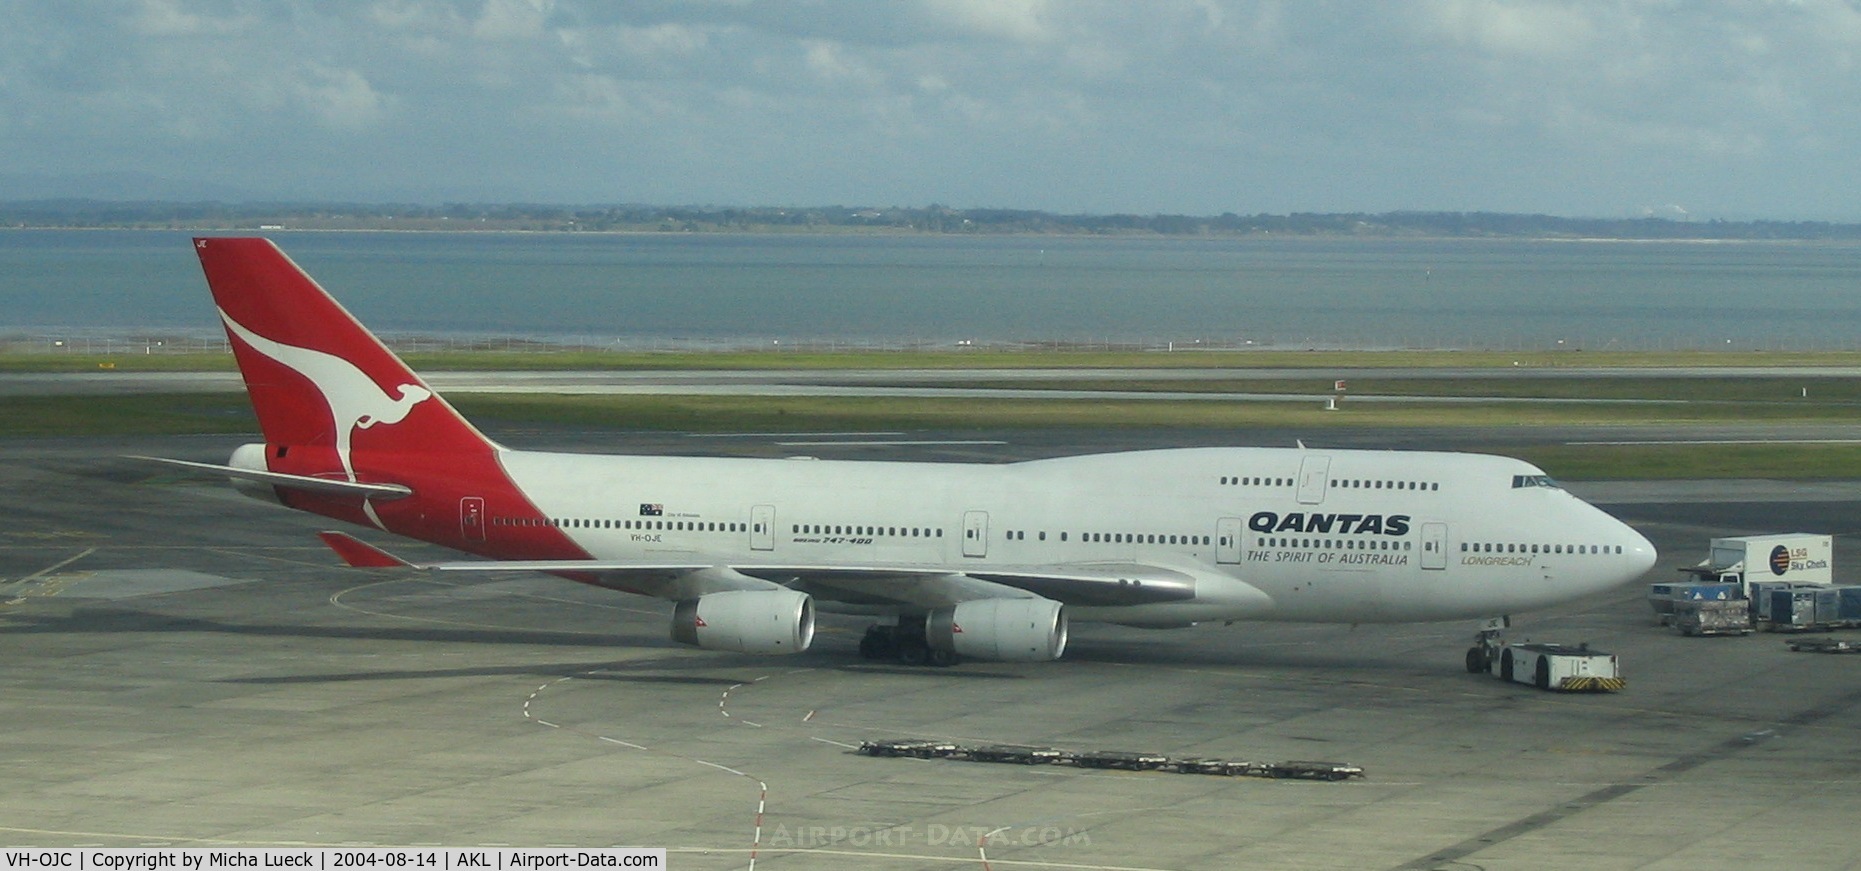 VH-OJC, 1989 Boeing 747-438 C/N 24406, The B747s have been Qantas long haul backbone for many years now